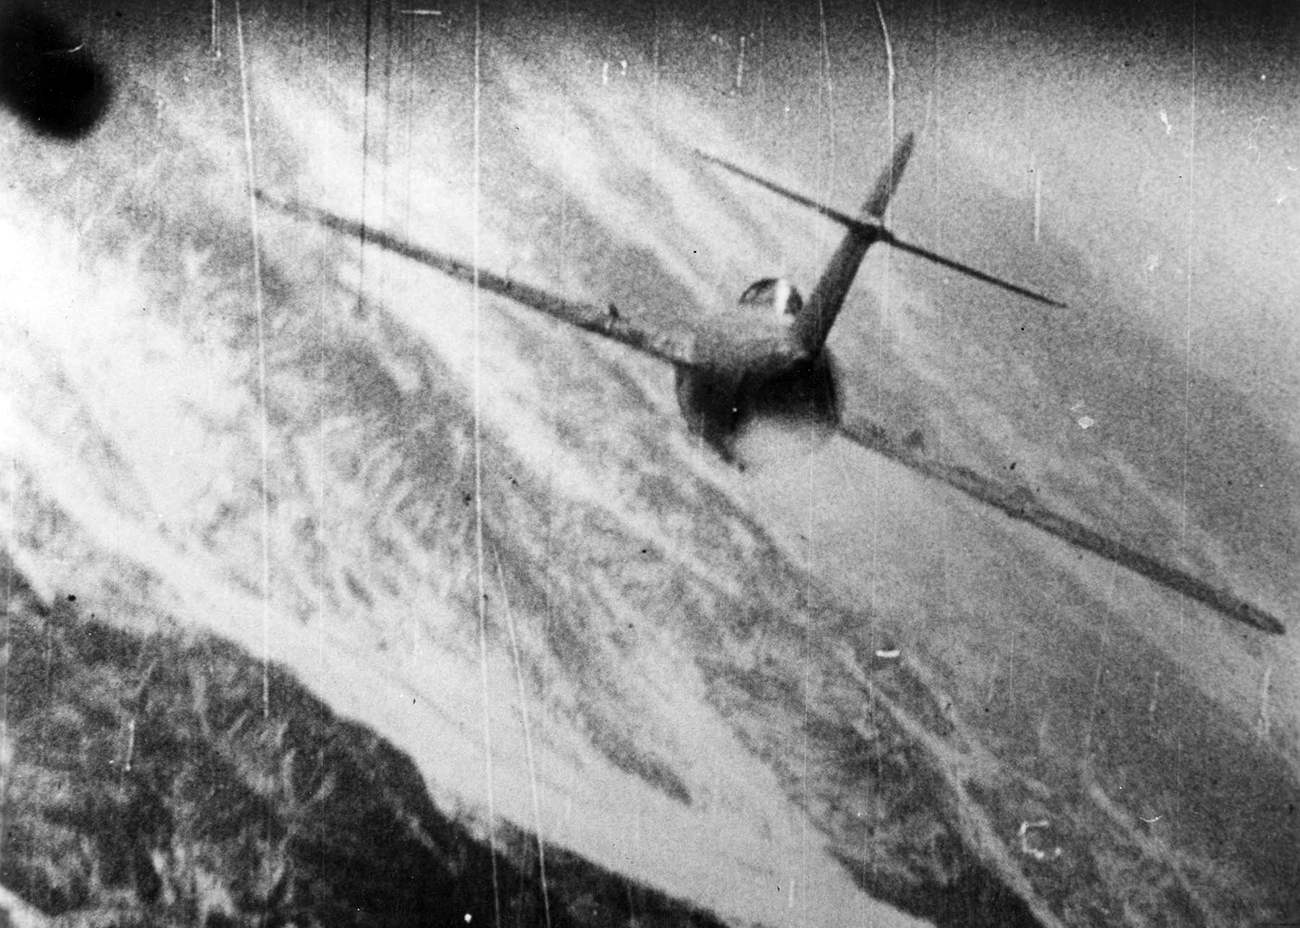 Declassified Soviet archives show a new picture about the air war over Korea in the 1950s. Source: USAF